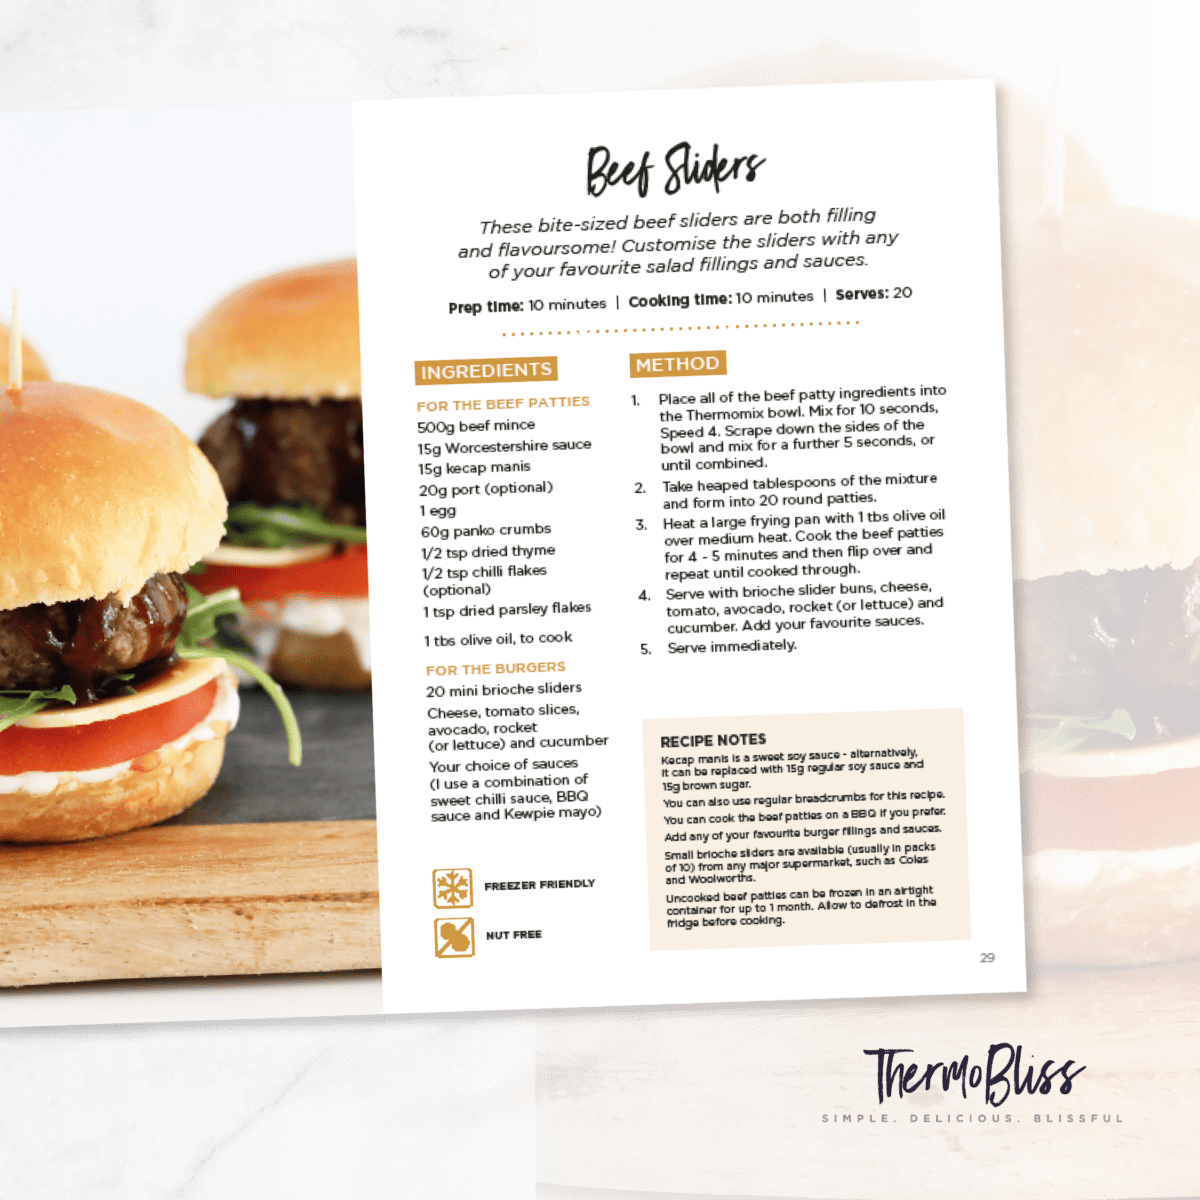 Image of the page featuring Beef Sliders recipe from the Thermomix Entertaining Cookbook.